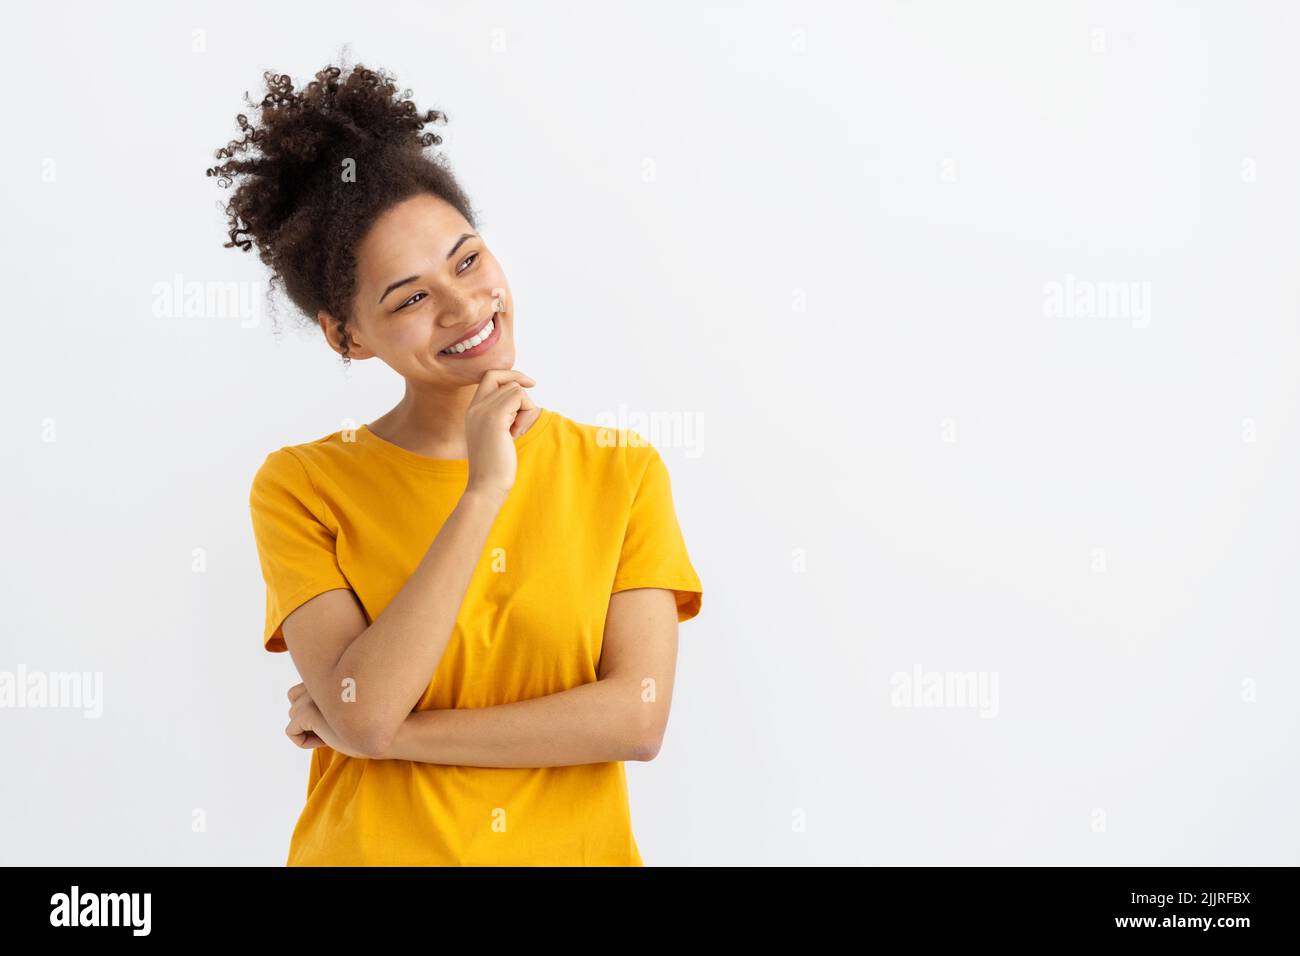 Portrait of young woman smiling and looking away on a white background with copy space smiles friendly Stock Photo